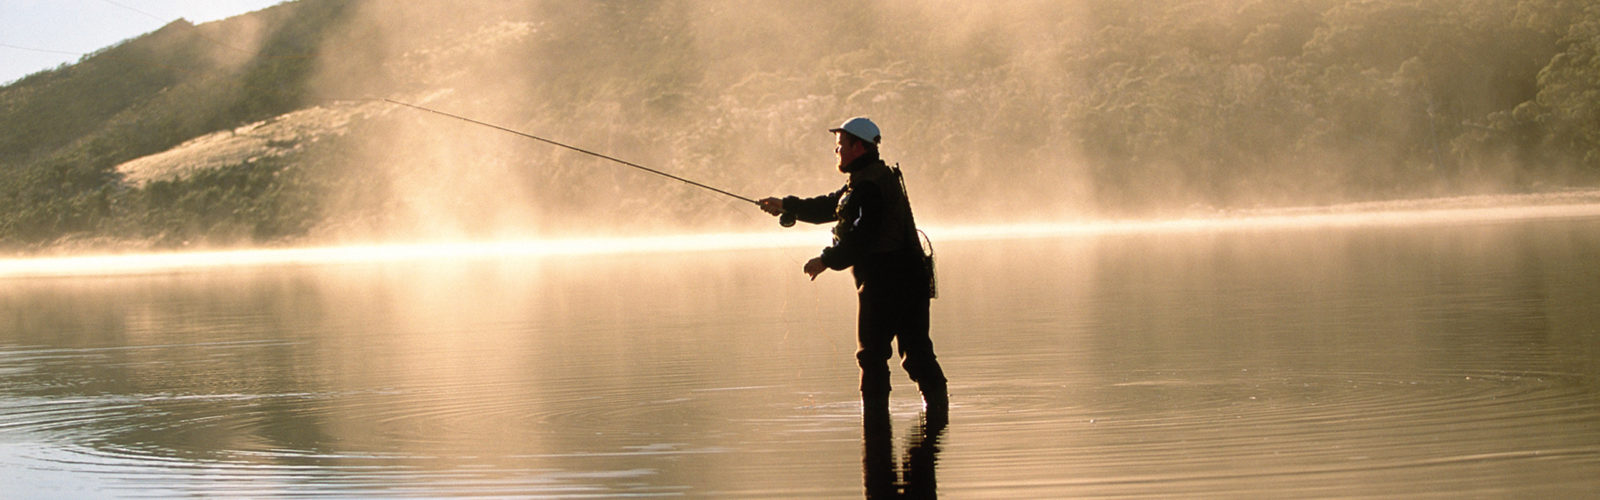 peppers-cradle-mountain-fly-fishing